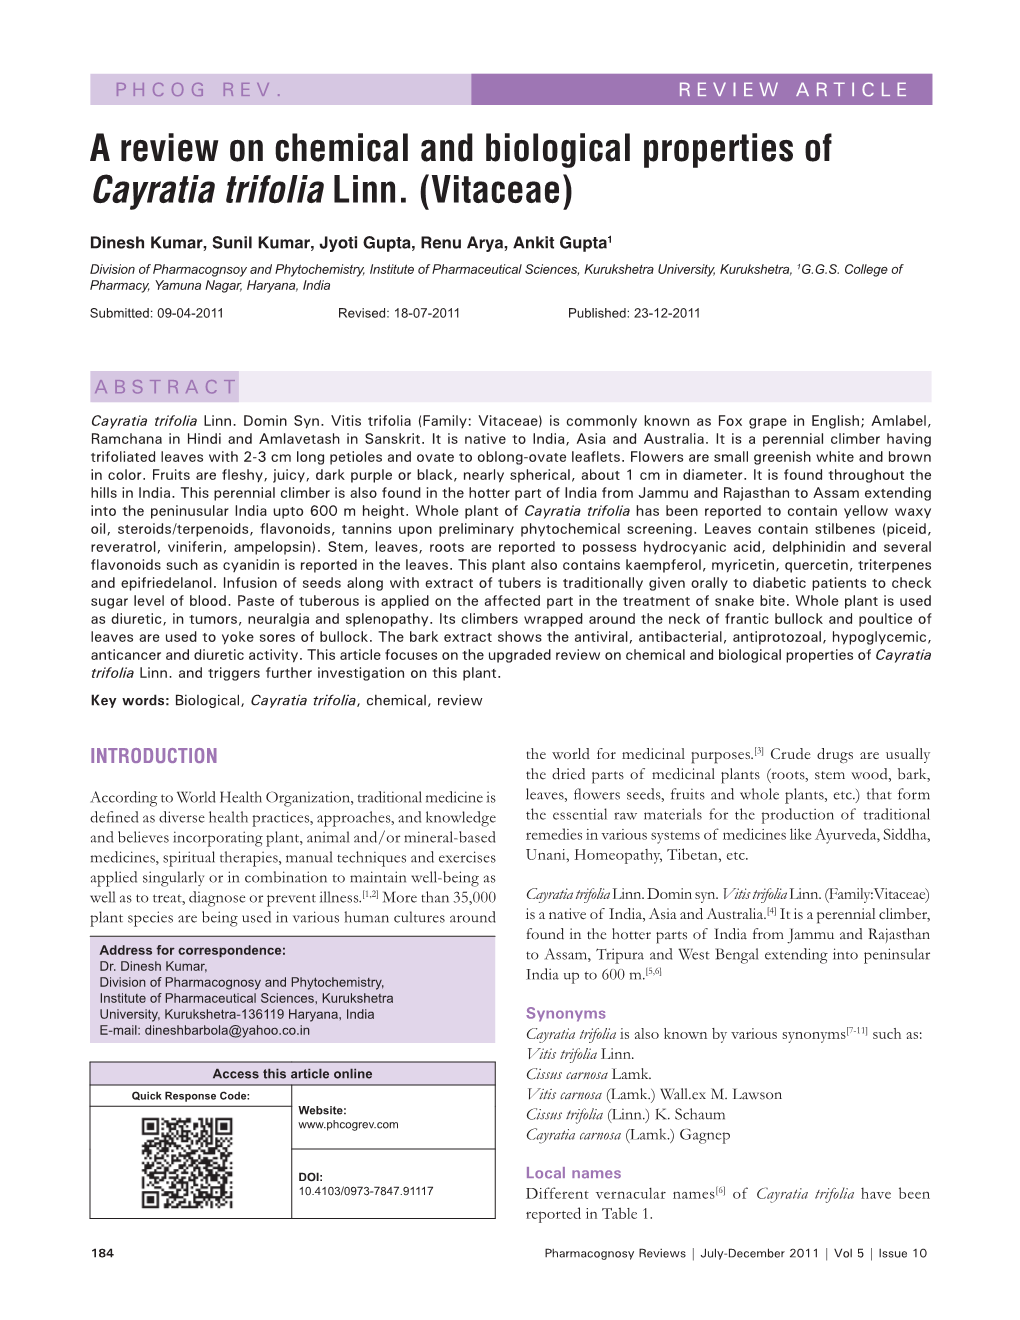 A Review on Chemical and Biological Properties of Cayratia Trifolia Linn